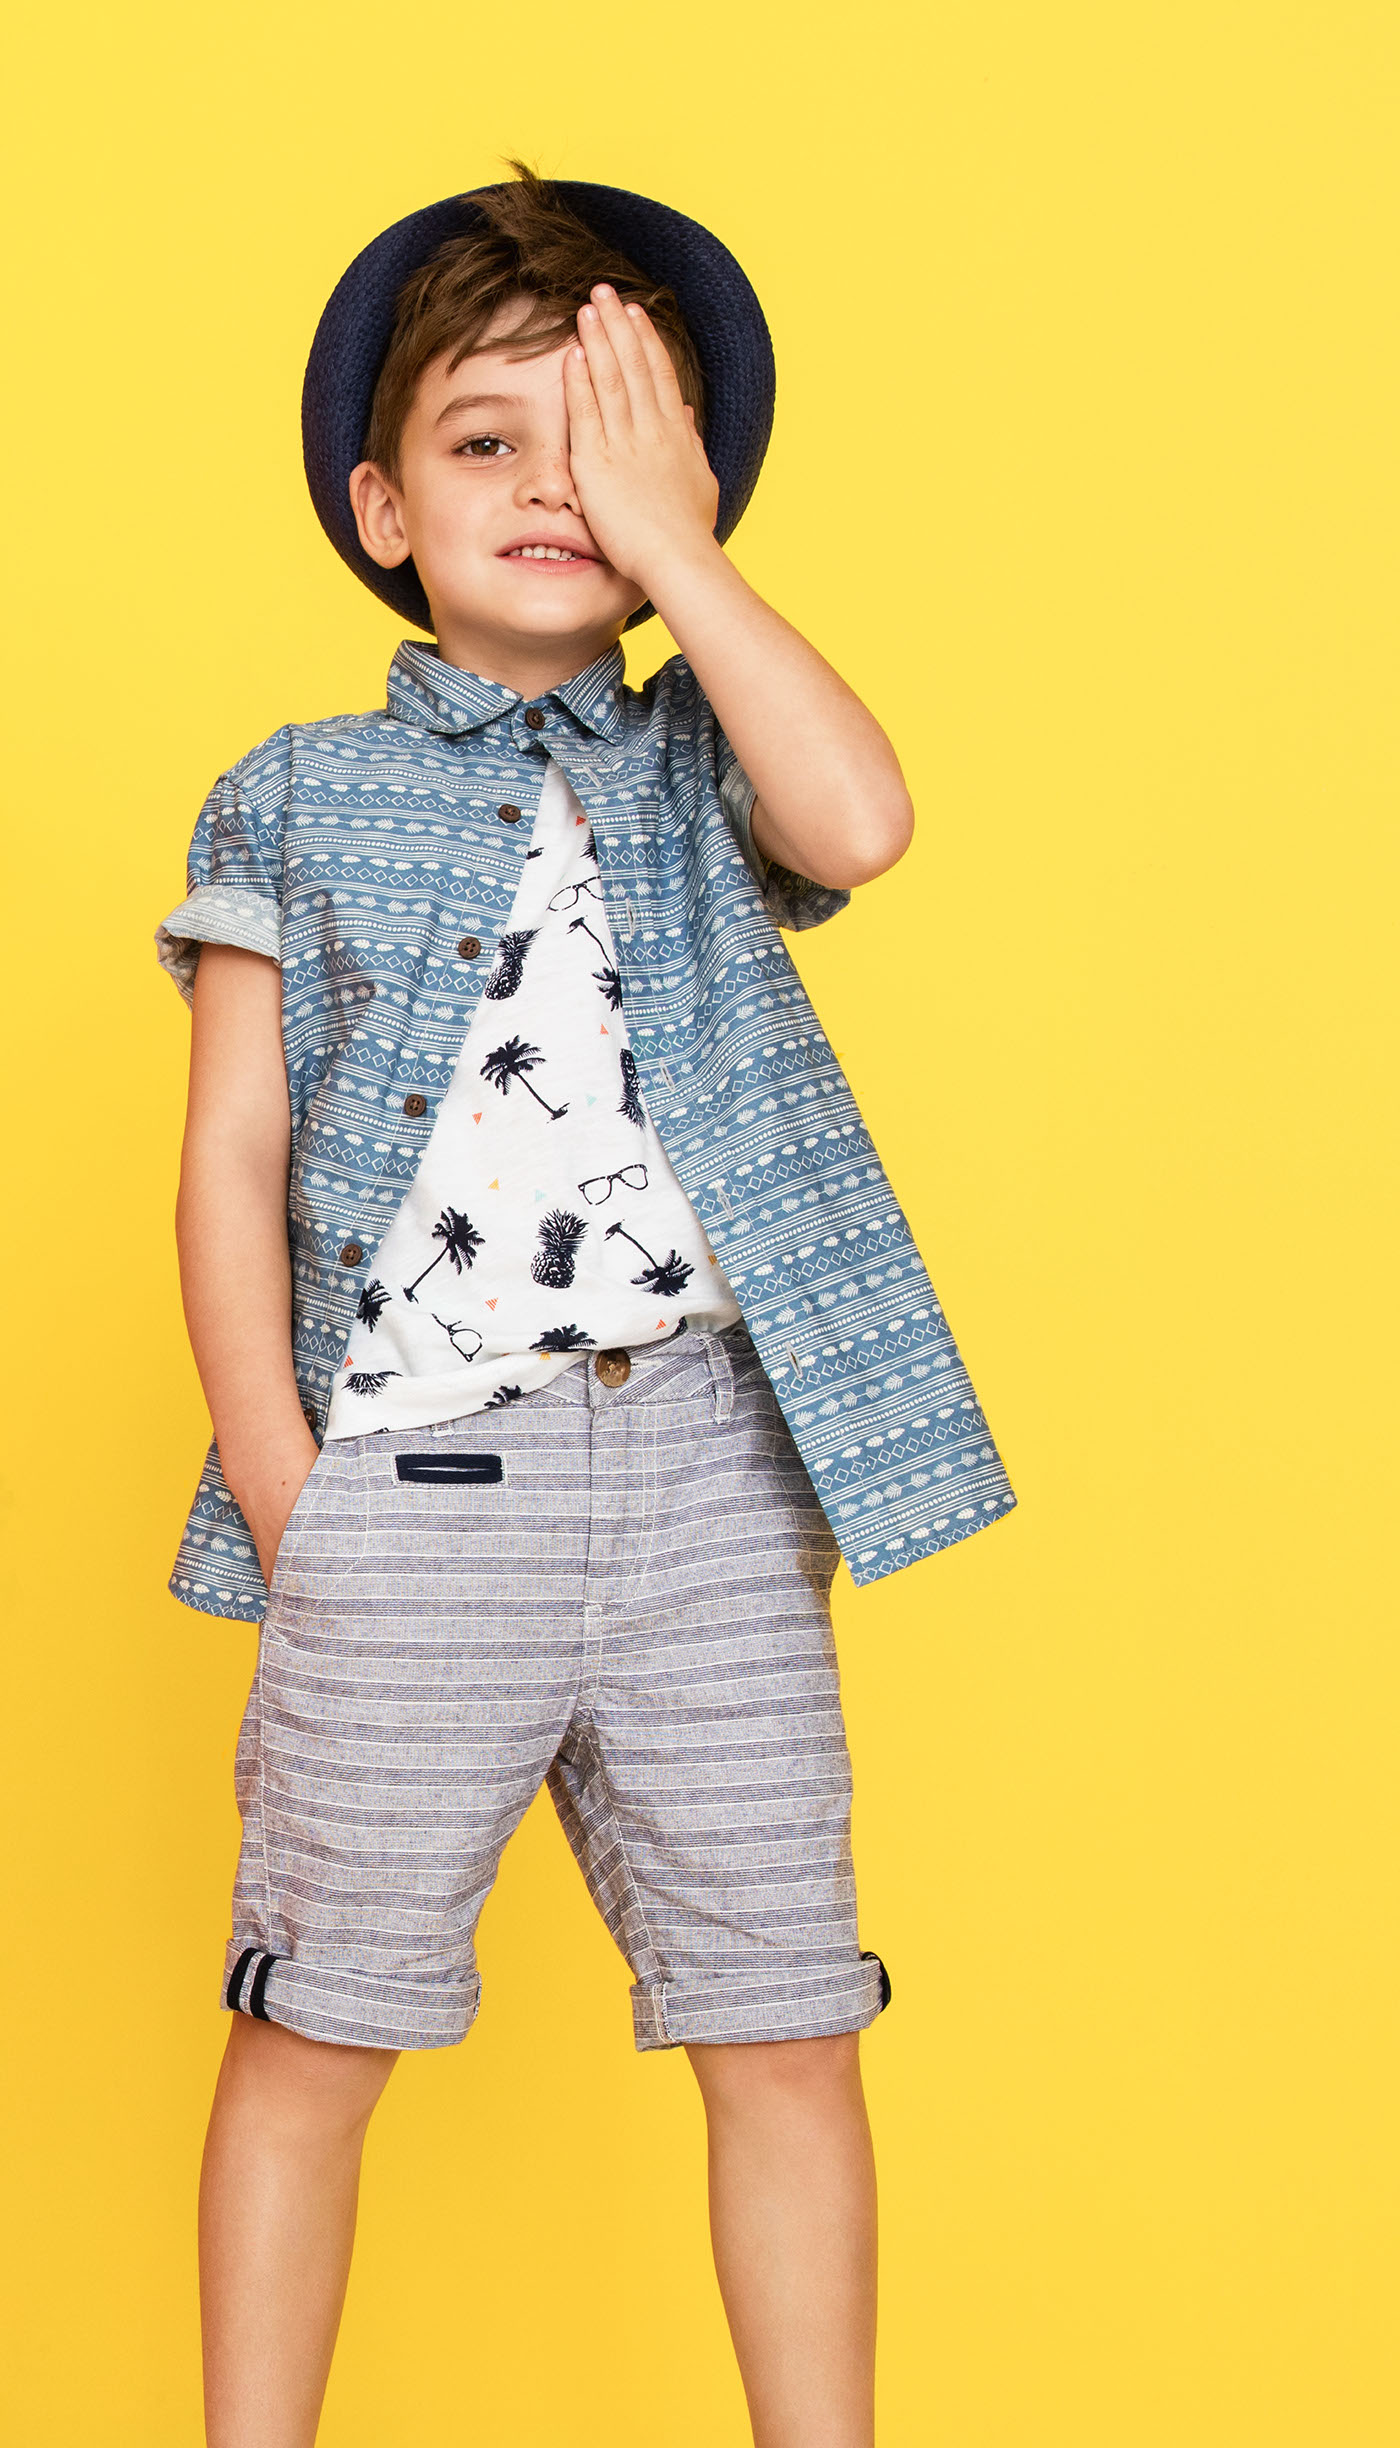 Fashion  kids summer17 woolworths art direction  Colourful  south africa